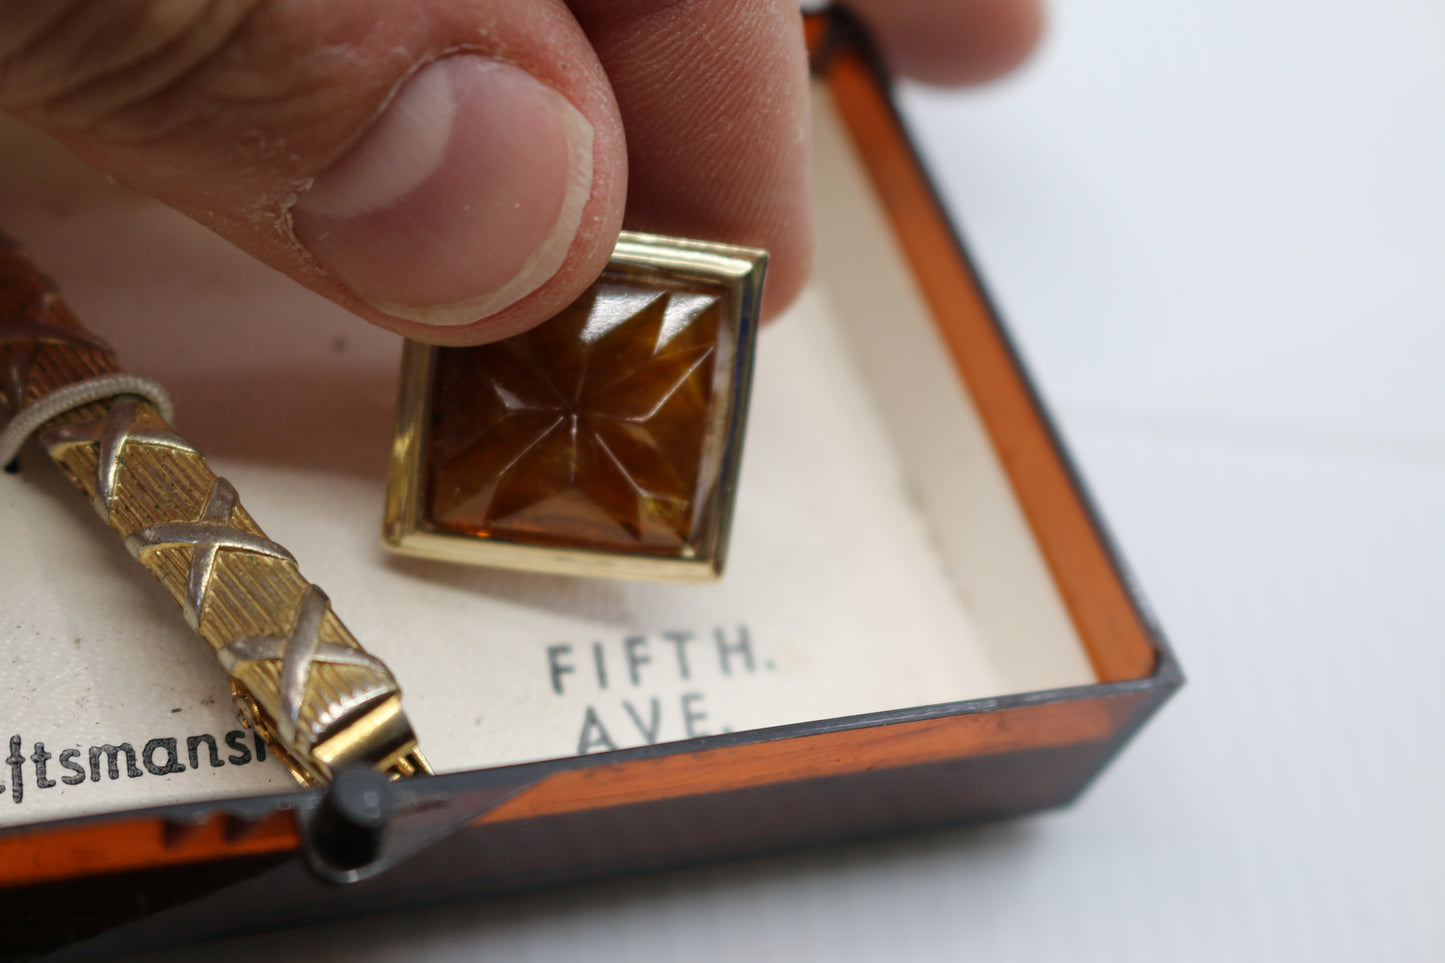 Vintage Fifth Ave. American Craftsmanship Cuff Links & Tie Clip Set Gift Box